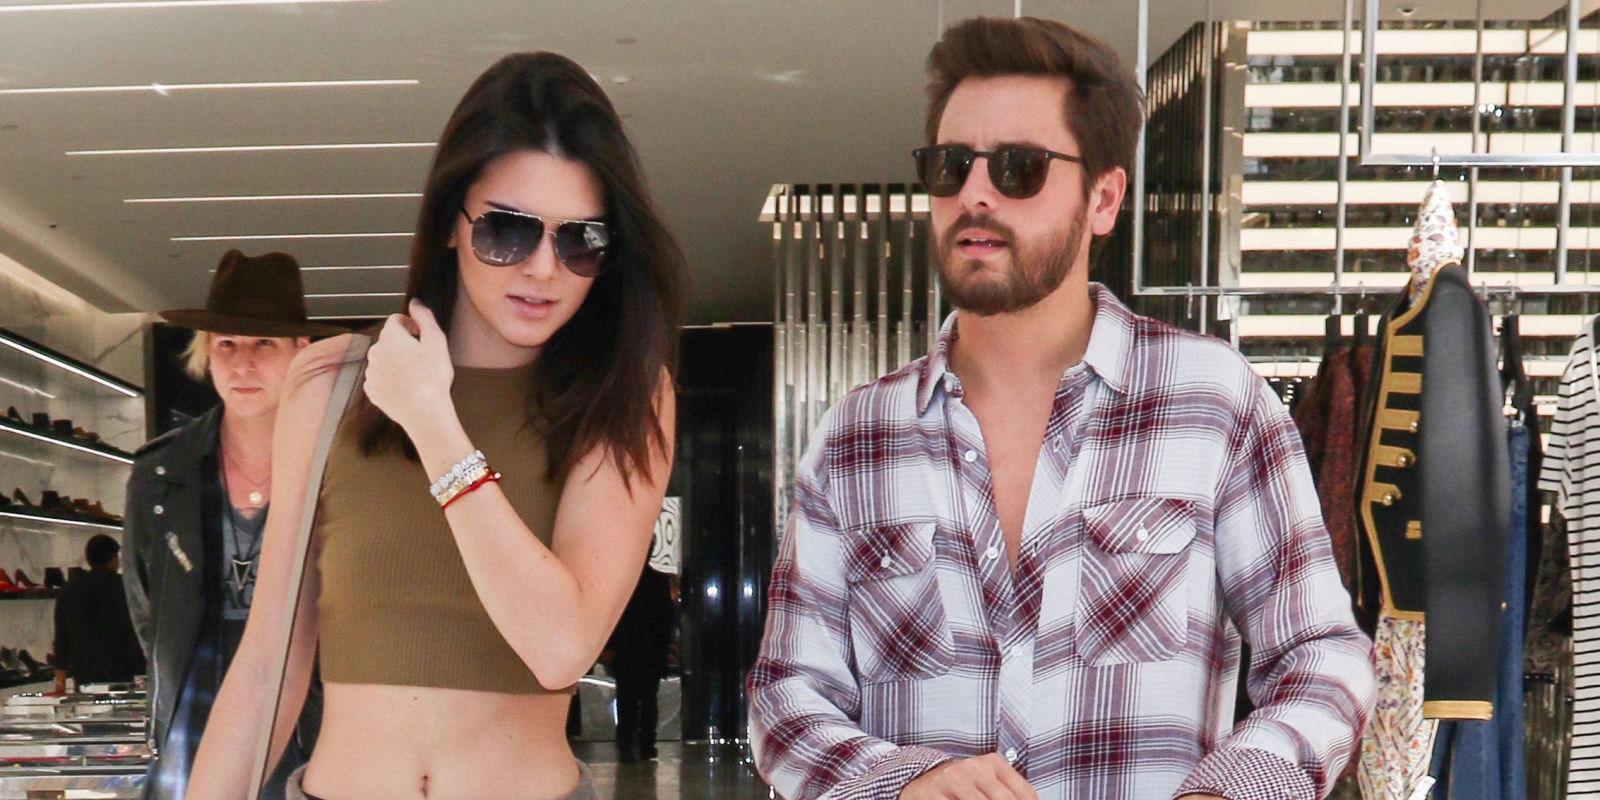 These headlines about Kendall Jenner 'sleeping with Scott Disick' are ...